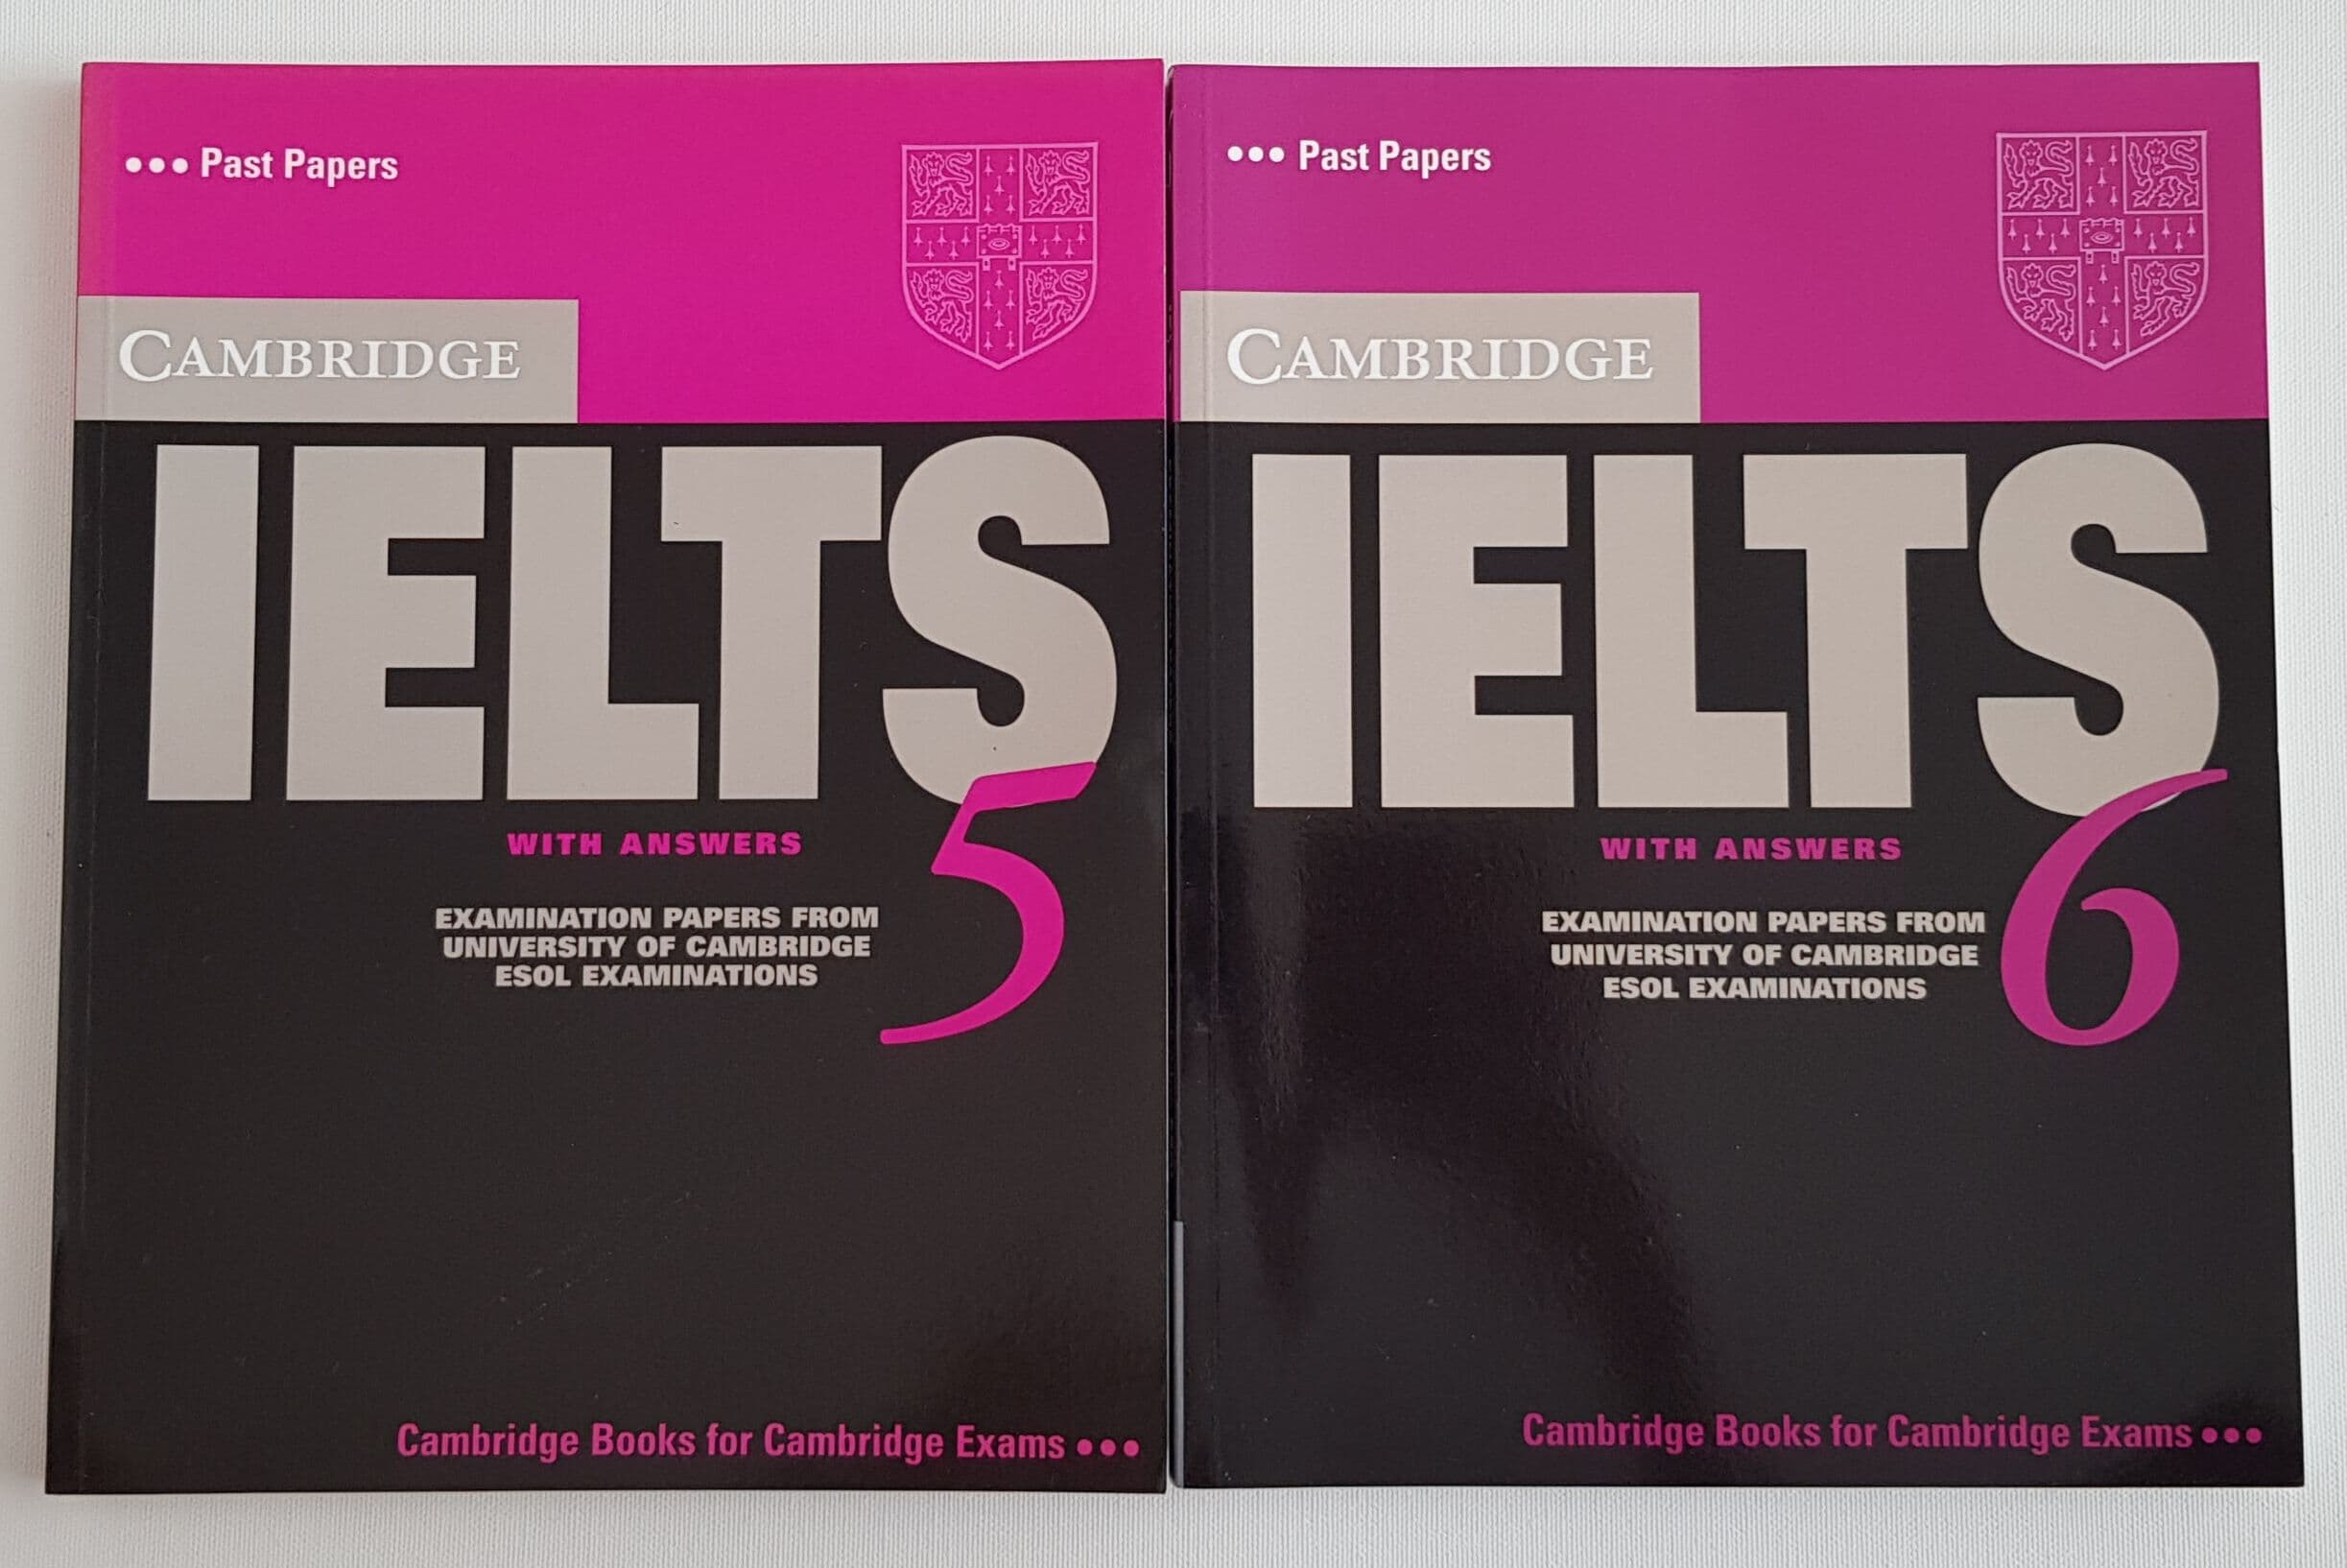 Cambridge IELTS 5 with answers/Past Paper